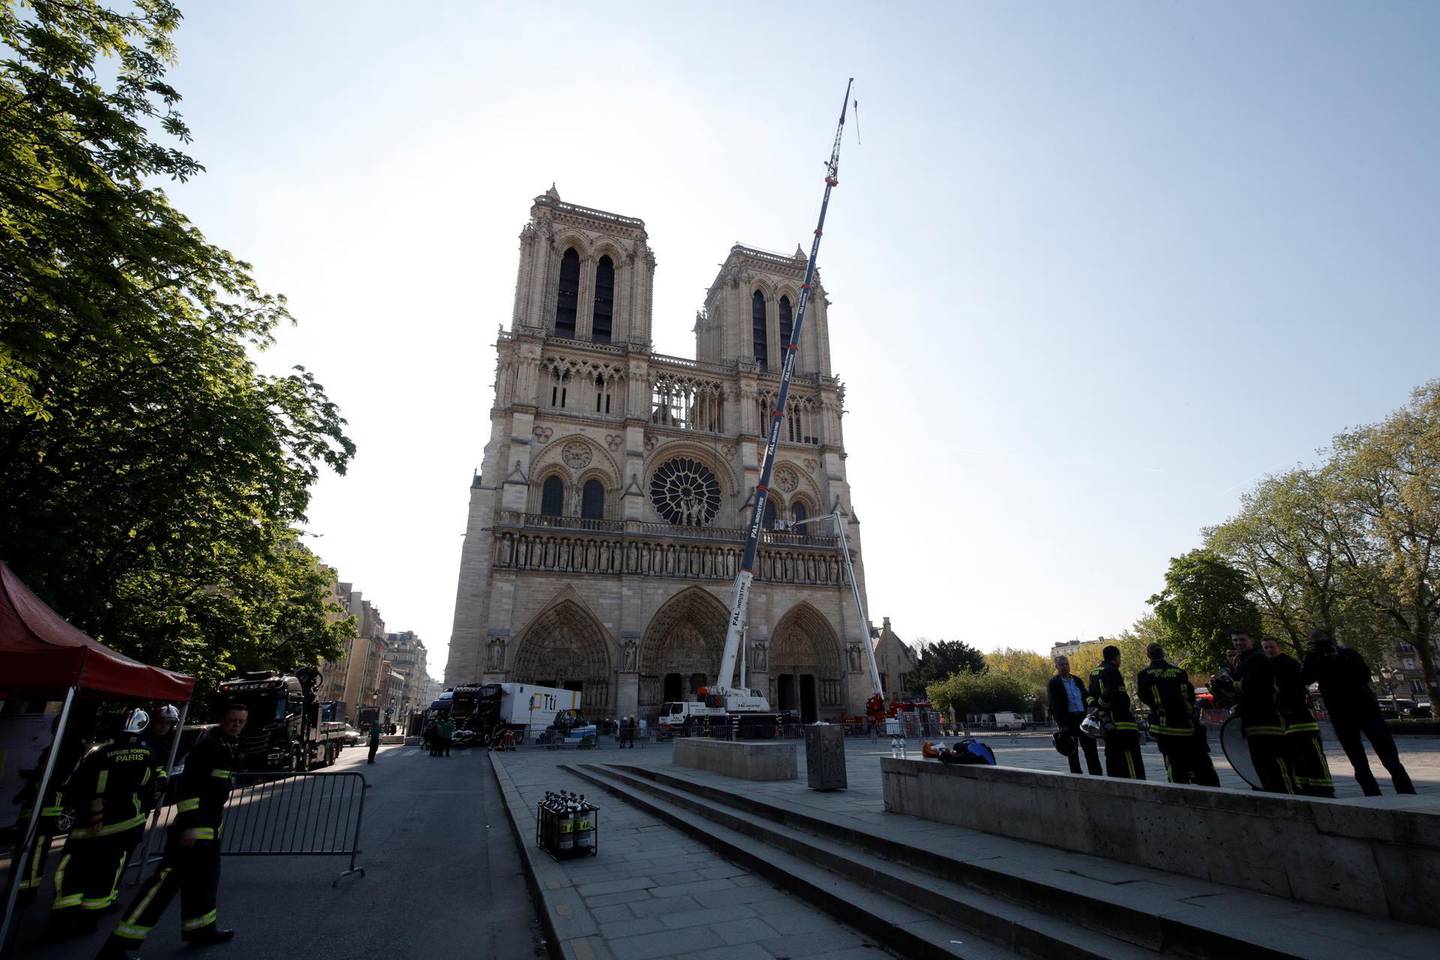 epa07515572 A view shows a crane working on a facade at the Notre-Dame Cathedral, days after a massive fire devastated large parts of the gothic structure in Paris, France, 19 April 2019. A fire ravaged Notre Dame of Paris Cathedral, one of the most visited monuments of the French capital, on 15 April.  EPA/PHILIPPE WOJAZER / POOL  MAXPPP OUT